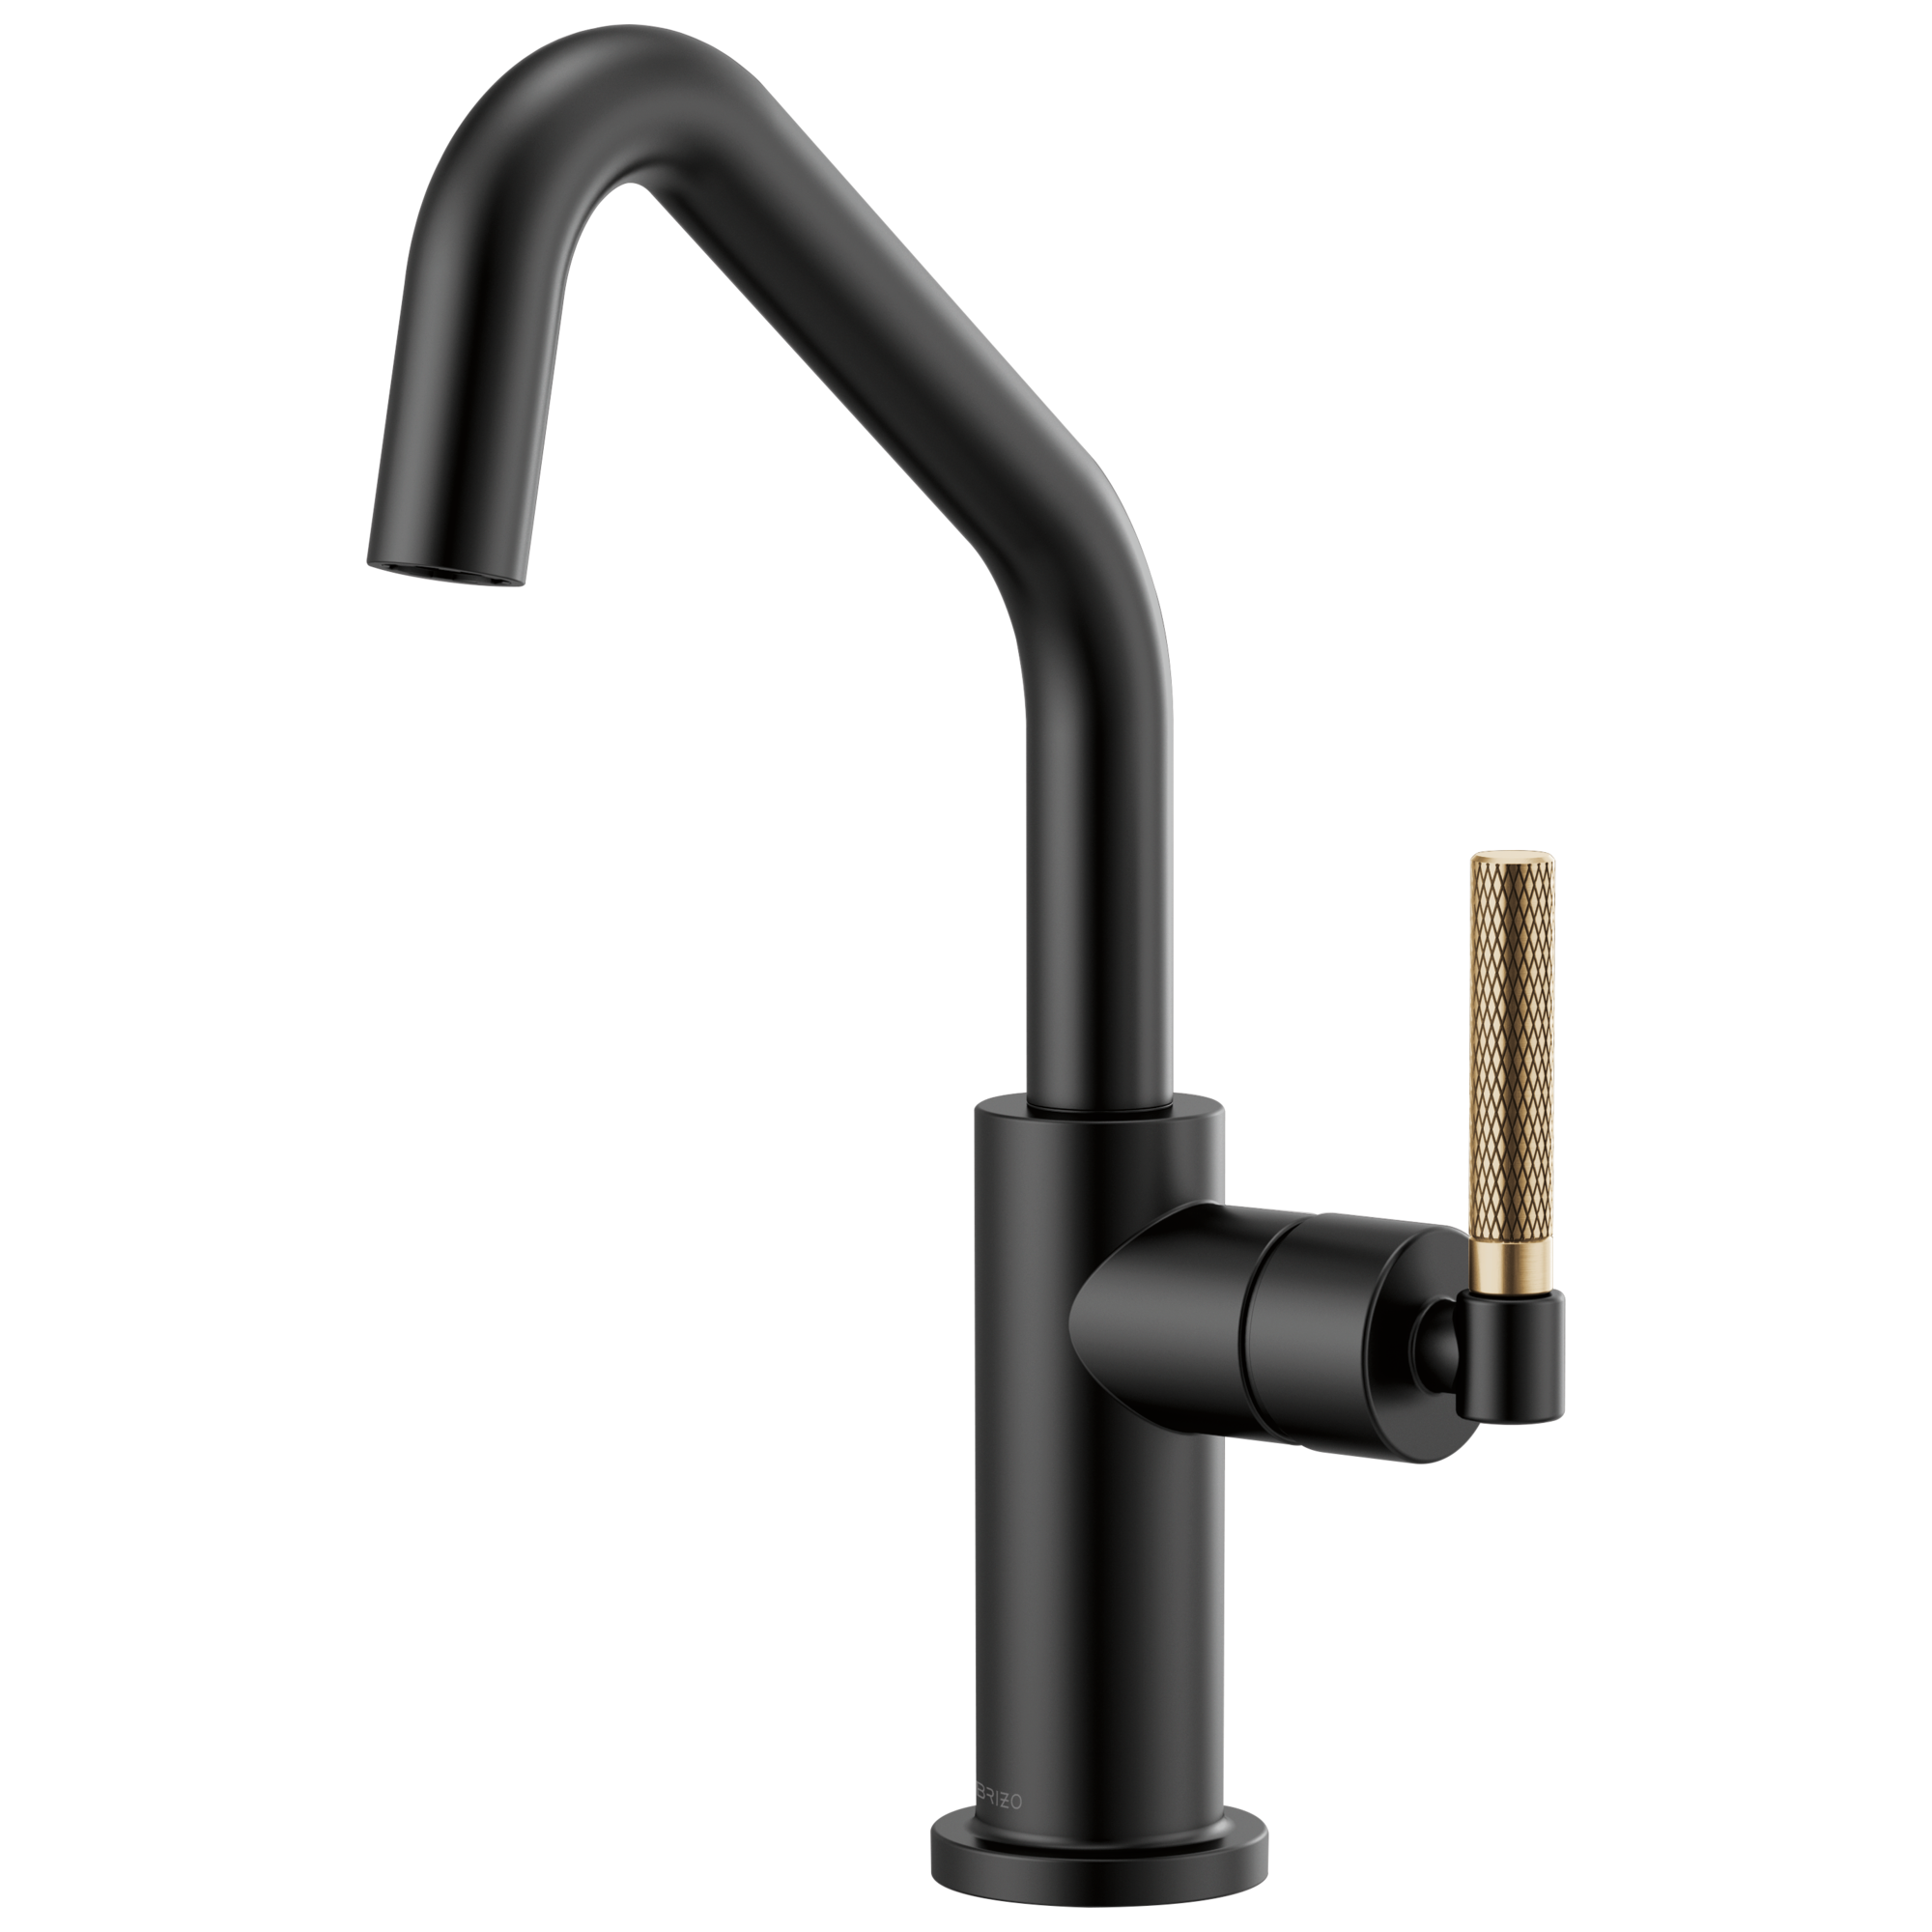 Brizo Litze: Bar Faucet with Angled Spout and Knurled Handle